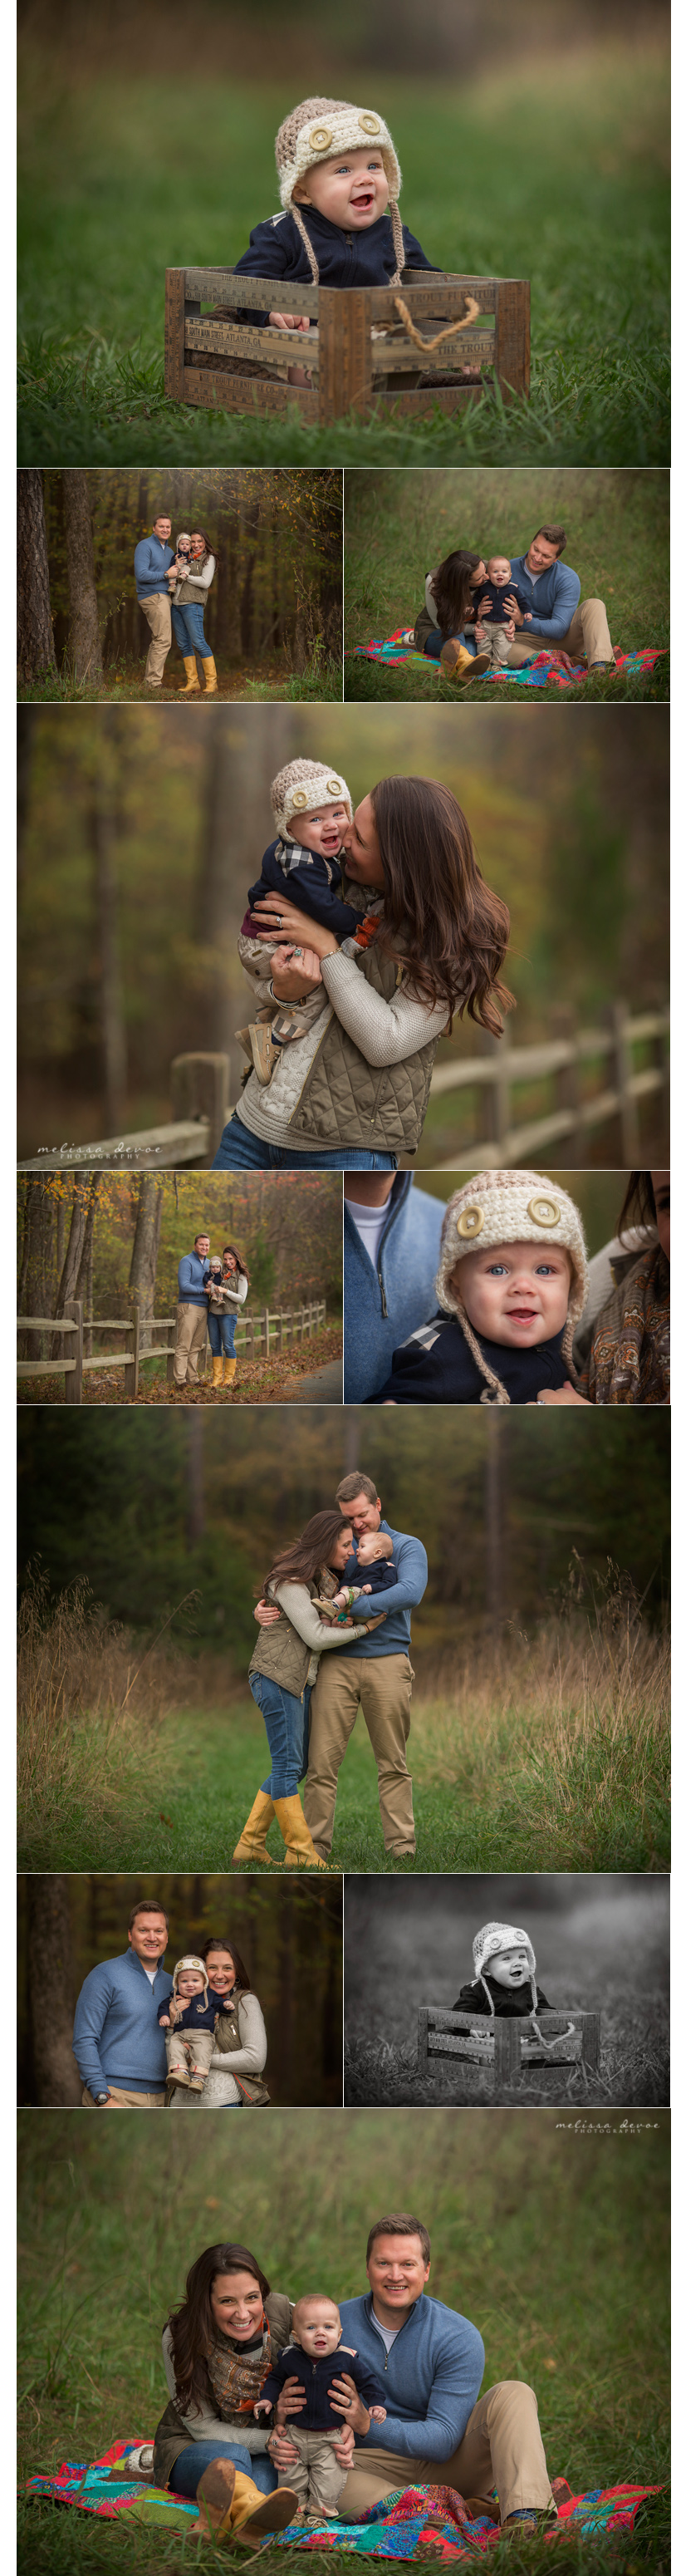 Melissa DeVoe Photography Raleigh NC Child and Family Photographer